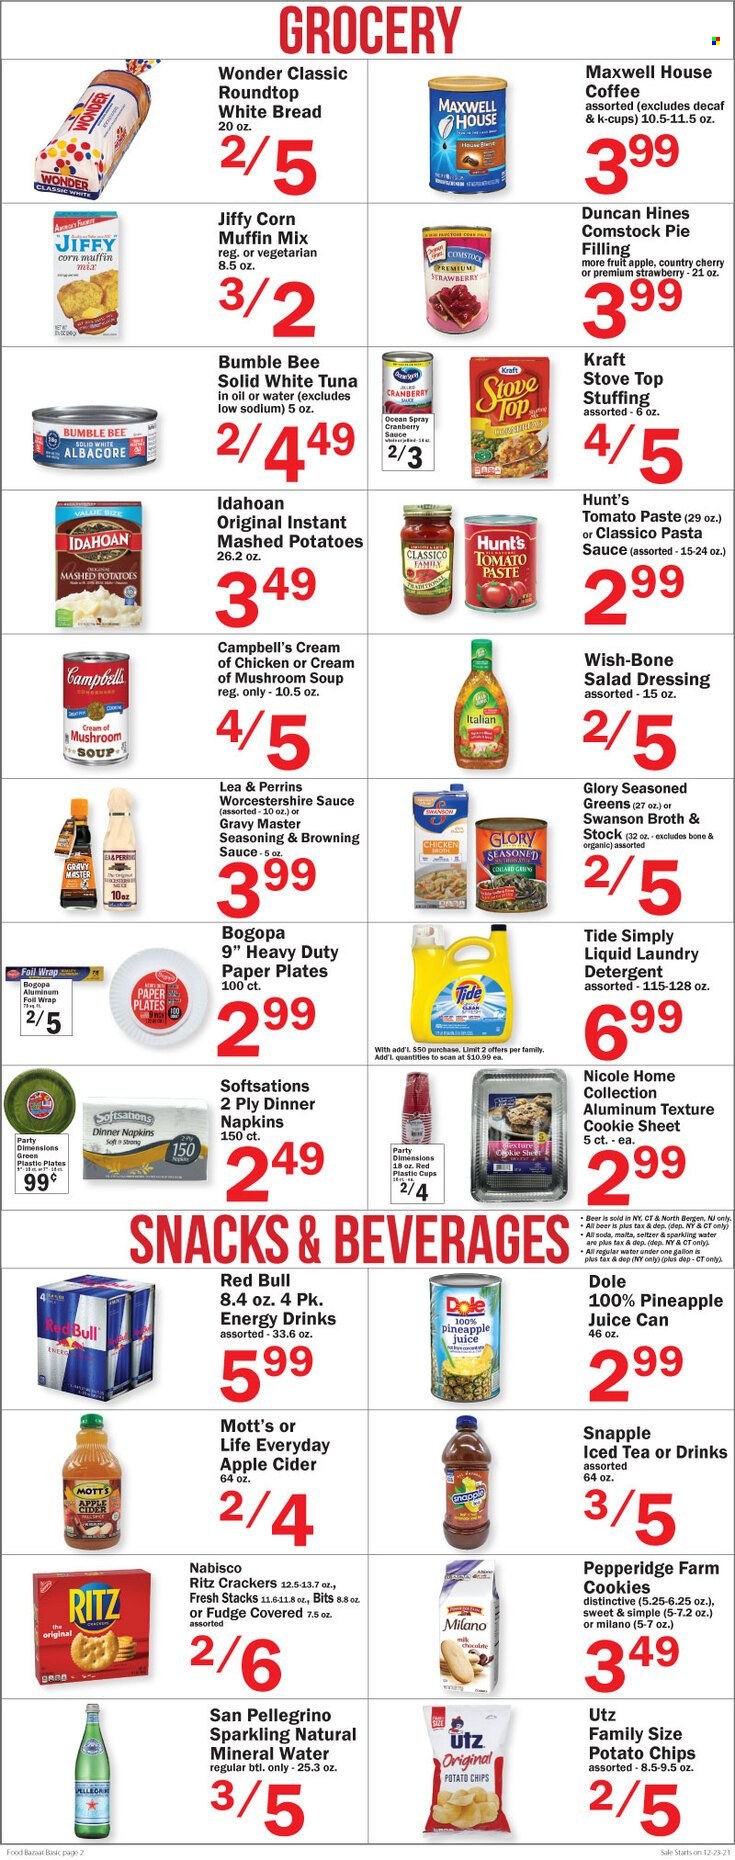 thumbnail - Food Bazaar Flyer - 12/23/2021 - 12/29/2021 - Sales products - bread, white bread, pie, muffin mix, corn, Dole, pineapple, Mott's, tuna, Campbell's, mashed potatoes, mushroom soup, pasta sauce, soup, Bumble Bee, sauce, Kraft®, cookies, fudge, snack, crackers, RITZ, potato chips, chips, broth, corn muffin, tomato paste, spice, salad dressing, worcestershire sauce, dressing, Classico, pineapple juice, juice, energy drink, ice tea, Red Bull, Snapple, mineral water, soda, sparkling water, San Pellegrino, Maxwell House, coffee, coffee capsules, K-Cups, apple cider, cider, beer. Page 2.